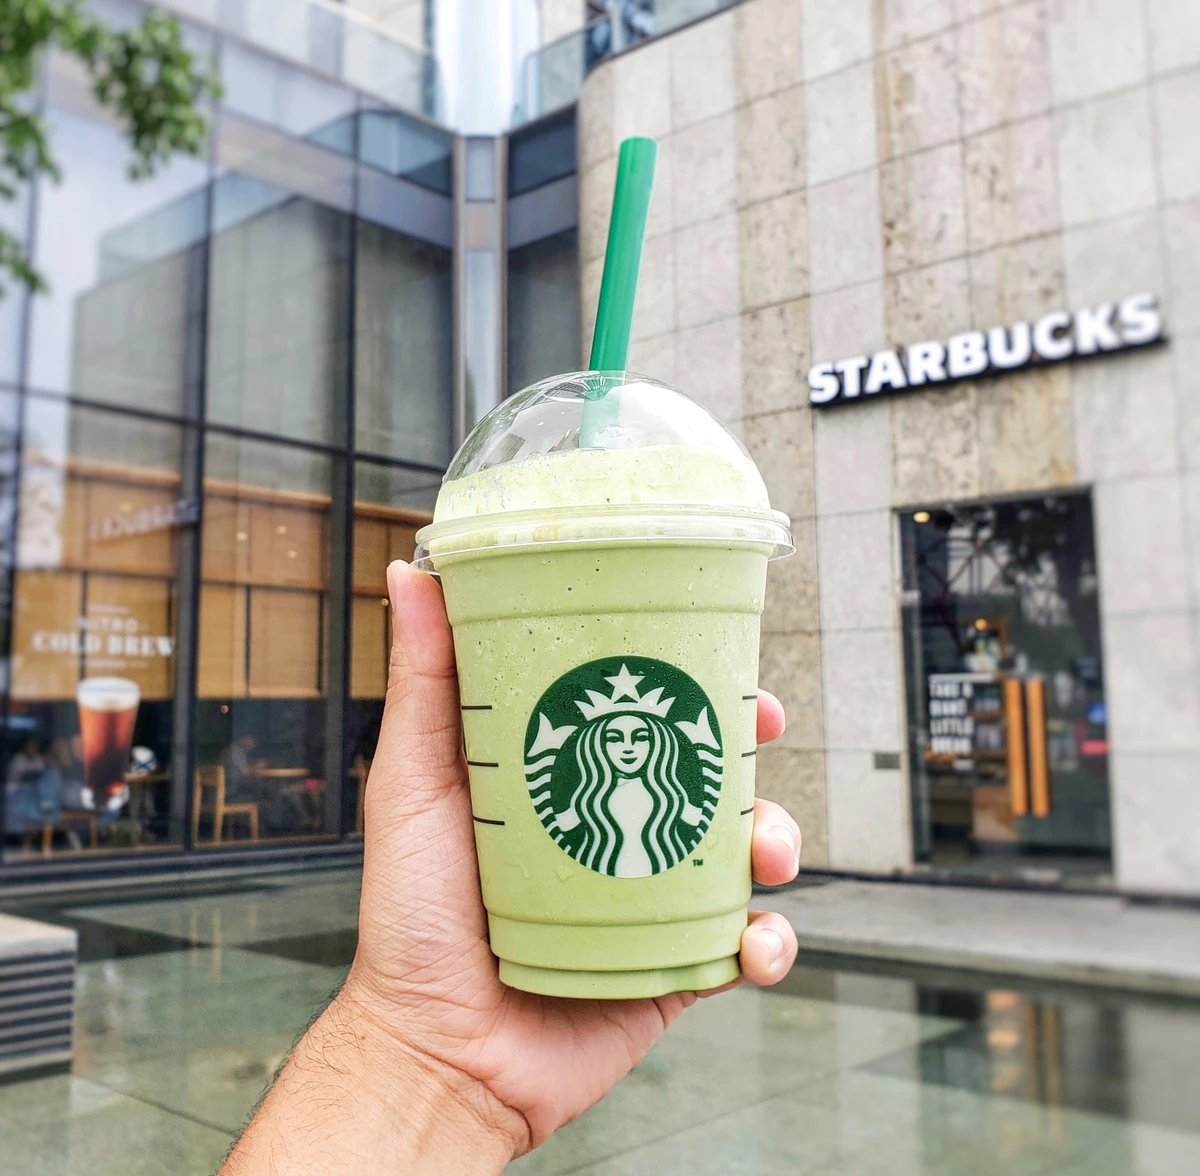 Your Guide to All the Vegan or Plant-Based Options at Starbucks